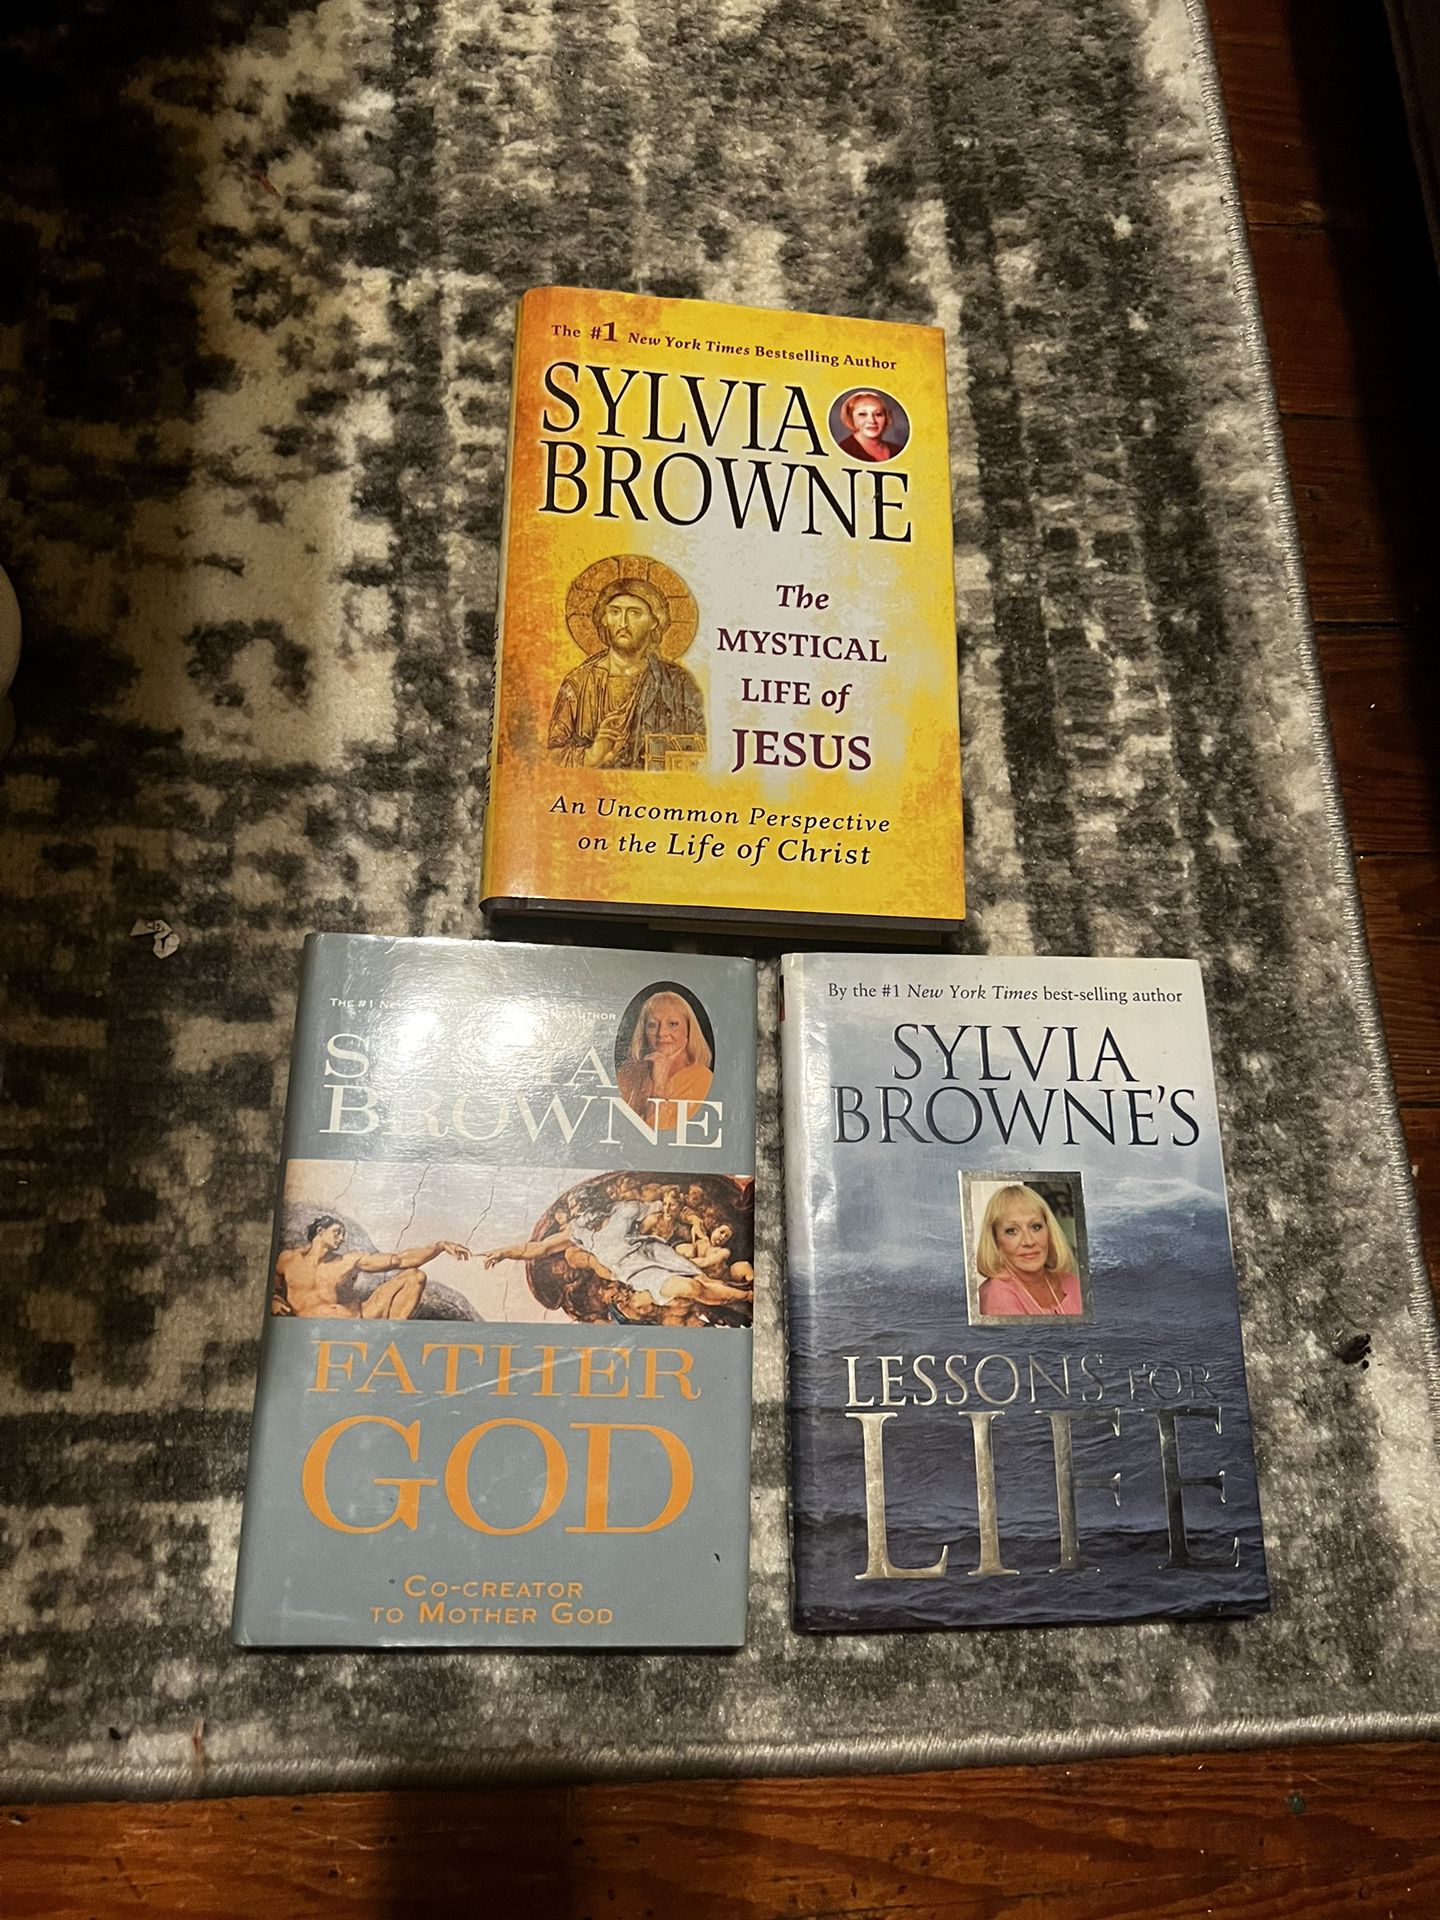 3 SYLVIA BROWNE Hardcover Books: THE MYSTICAL LIFE OF JESUS, FATHER GOD, & LESSONS FOR LIFE 